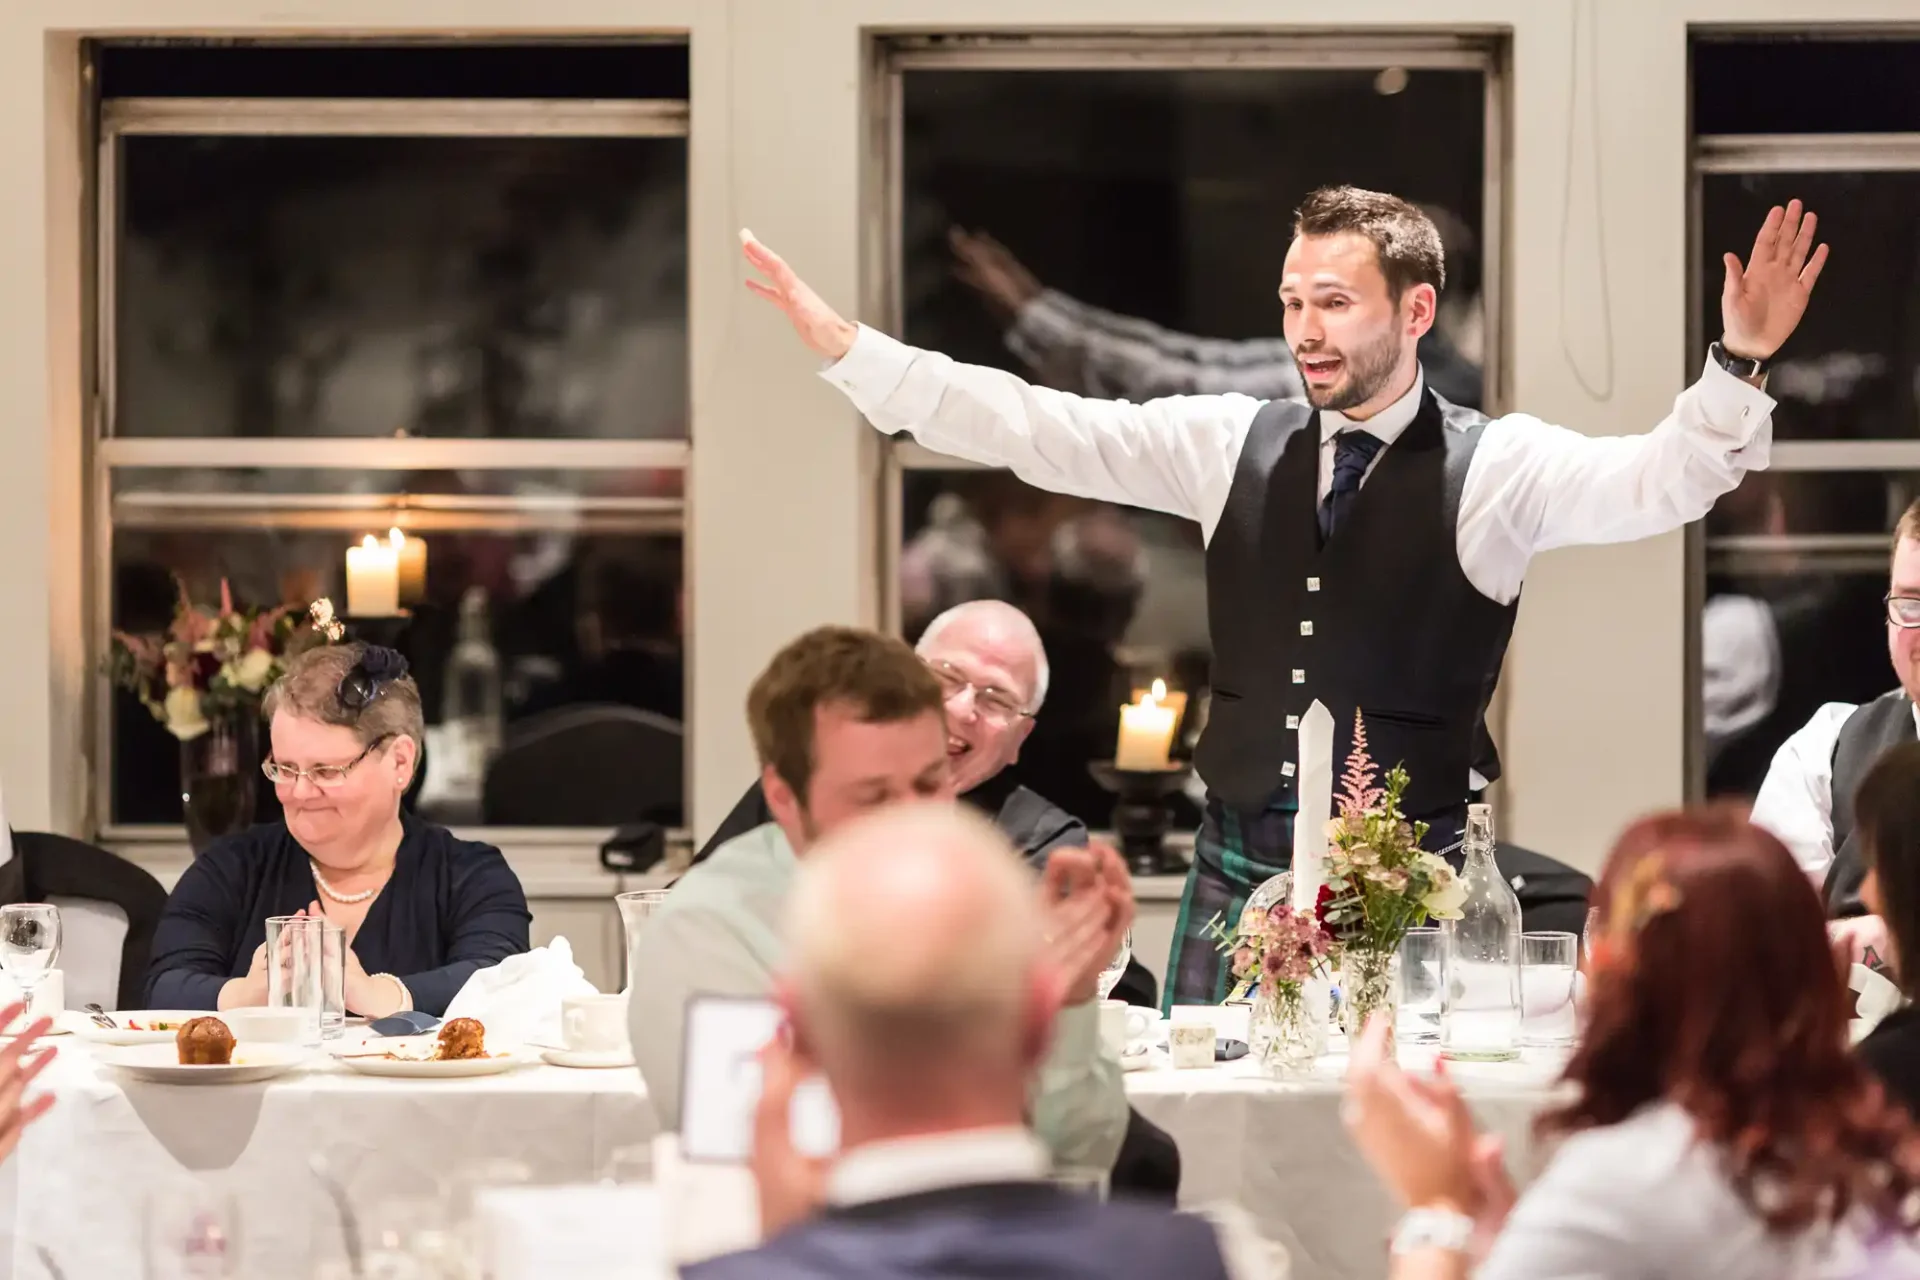 A man in a vest and tie gestures with arms wide open, speaking to seated guests at a warmly lit dinner event.